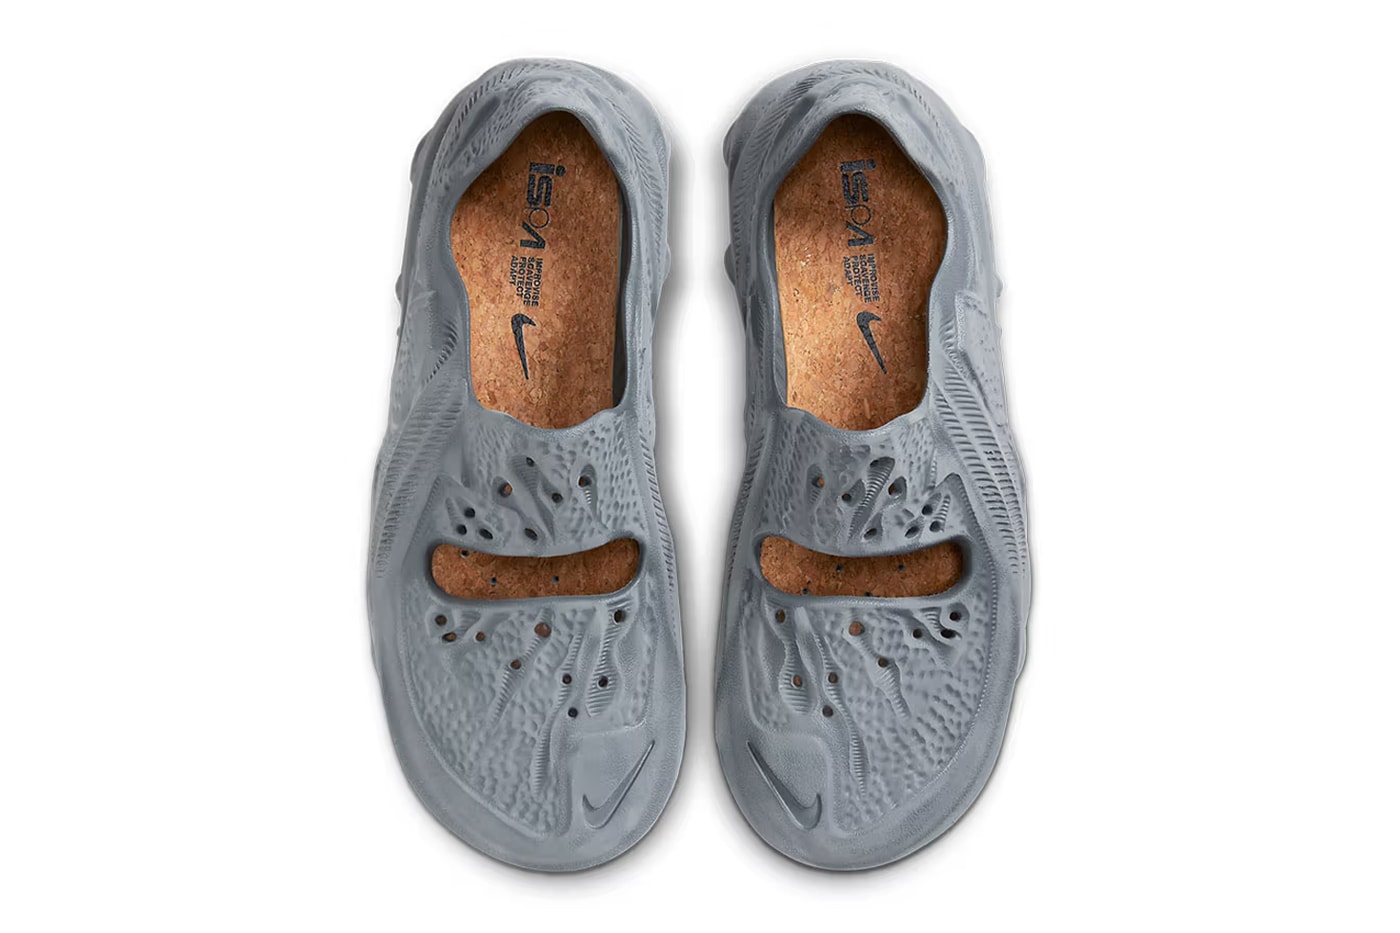 nike ispa universal gray DM0886 001 release date info store list buying guide photos price 